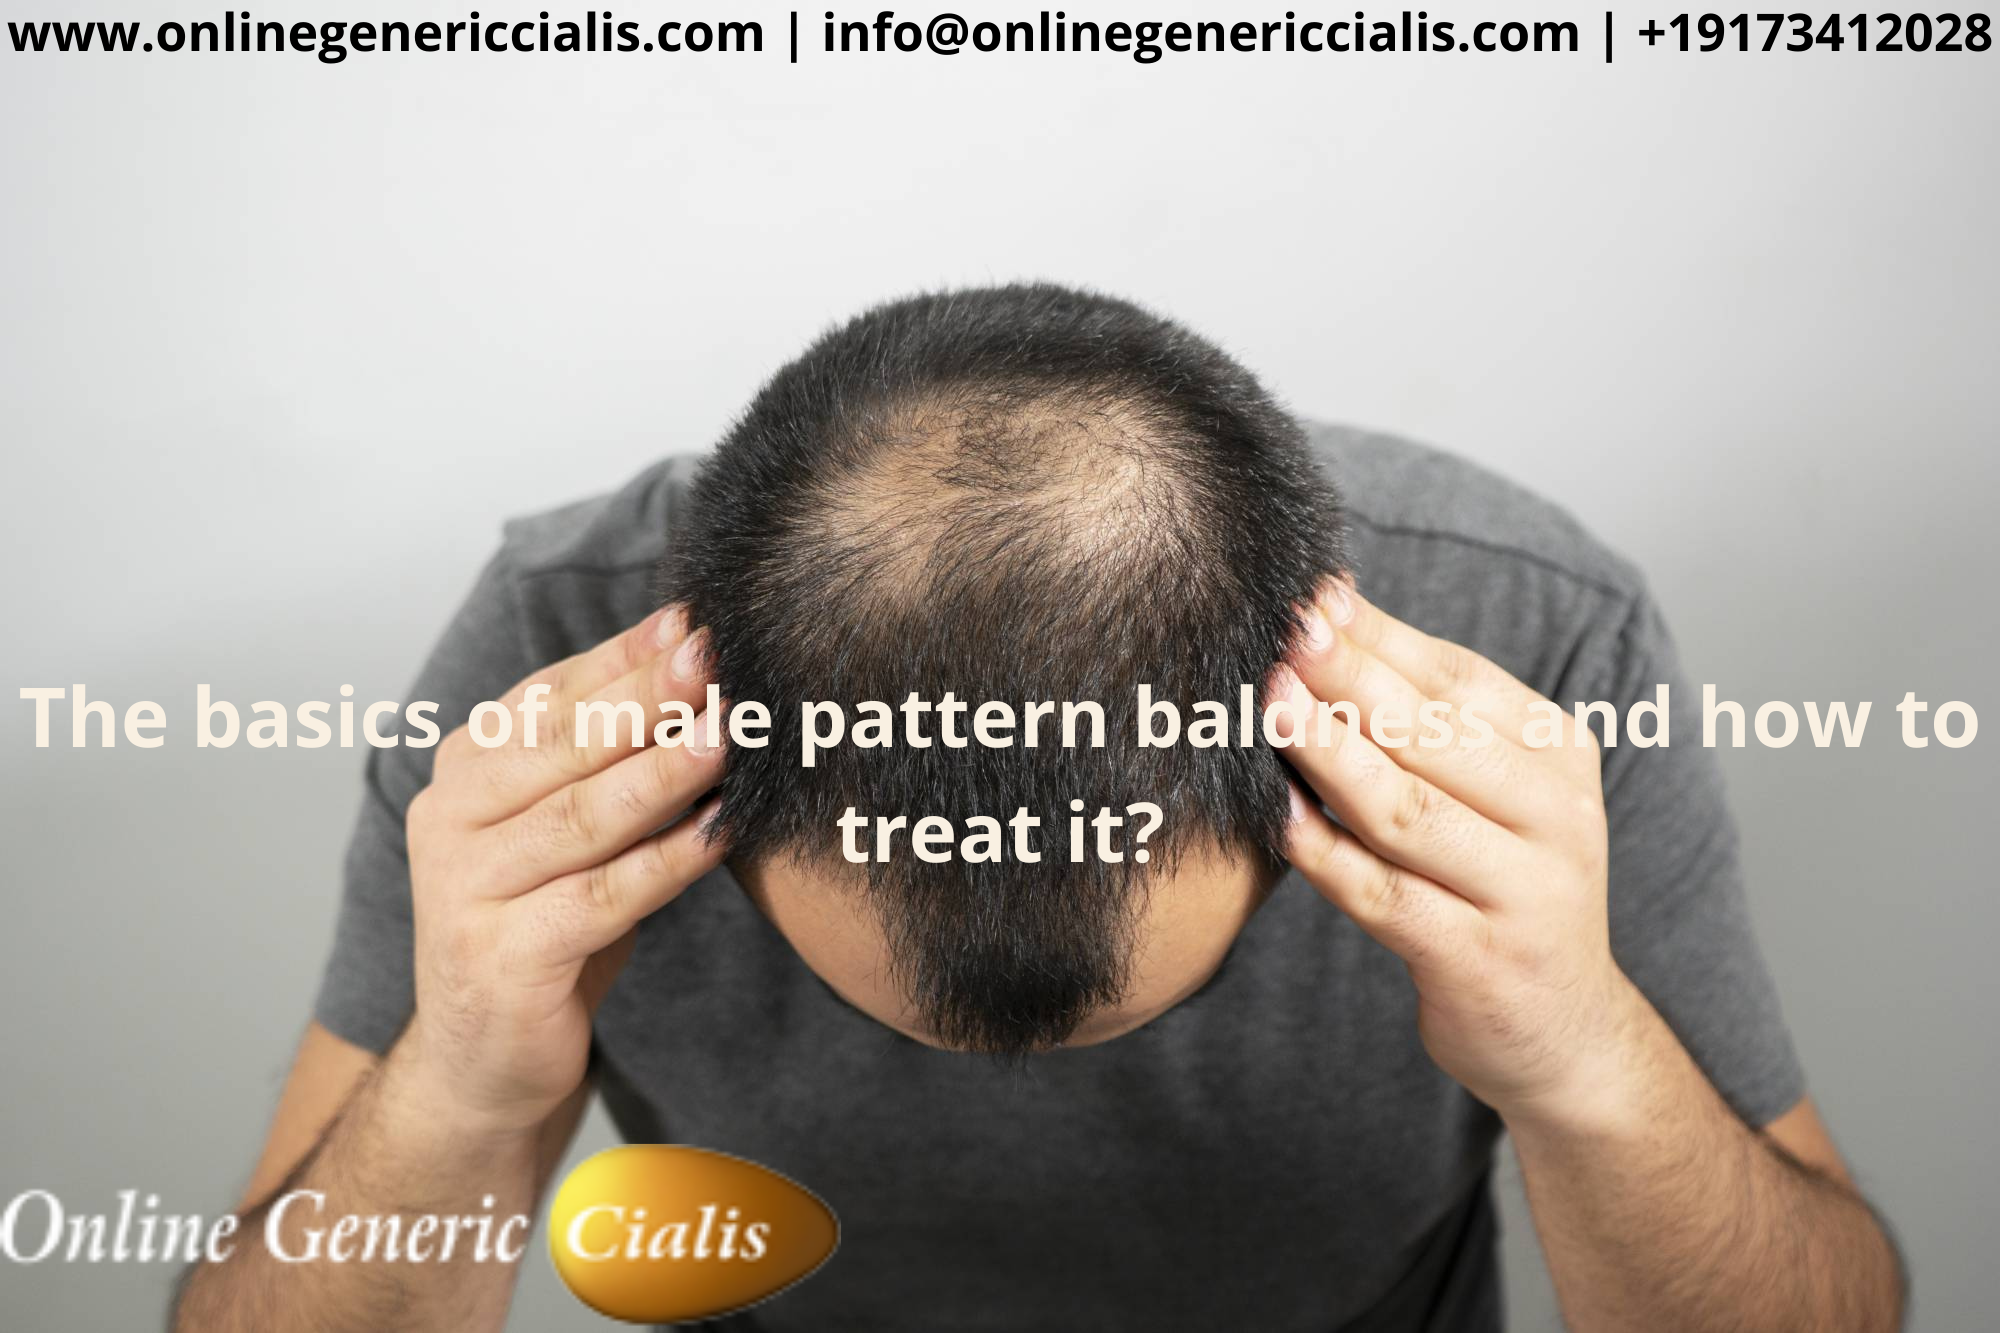 The basics of male pattern baldness and how to treat it?